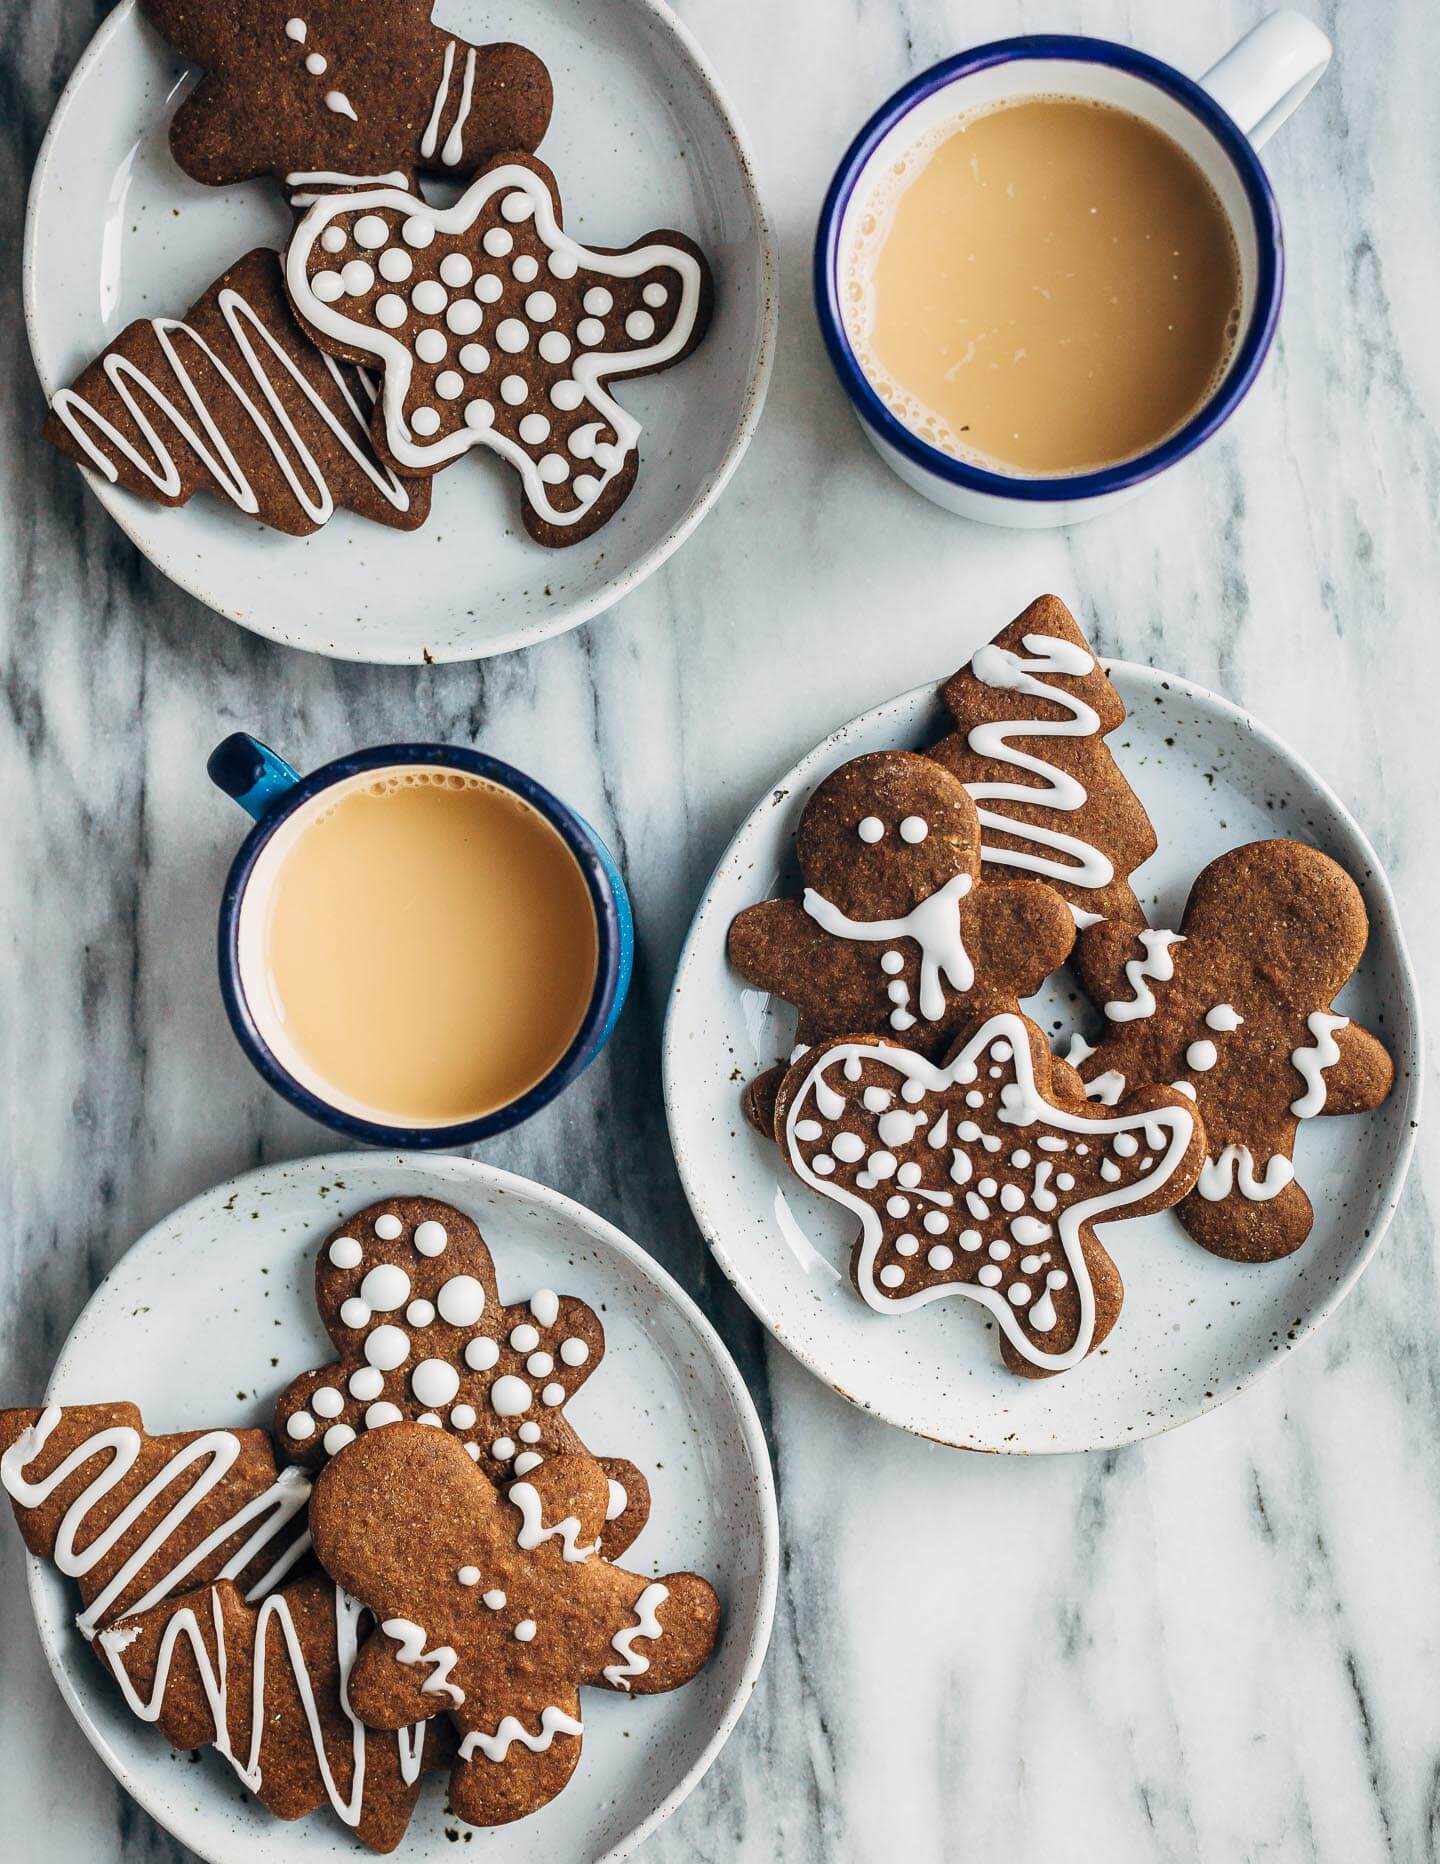 These spiced gingerbread cookies with lemon icing are perfectly sweet, with lots of depth from molasses and heat from a mix of cinnamon, chili powder, and fresh ground pepper. They're also really fun to make with kids. Head below for some simple tips for making rolled cookies with little ones. 